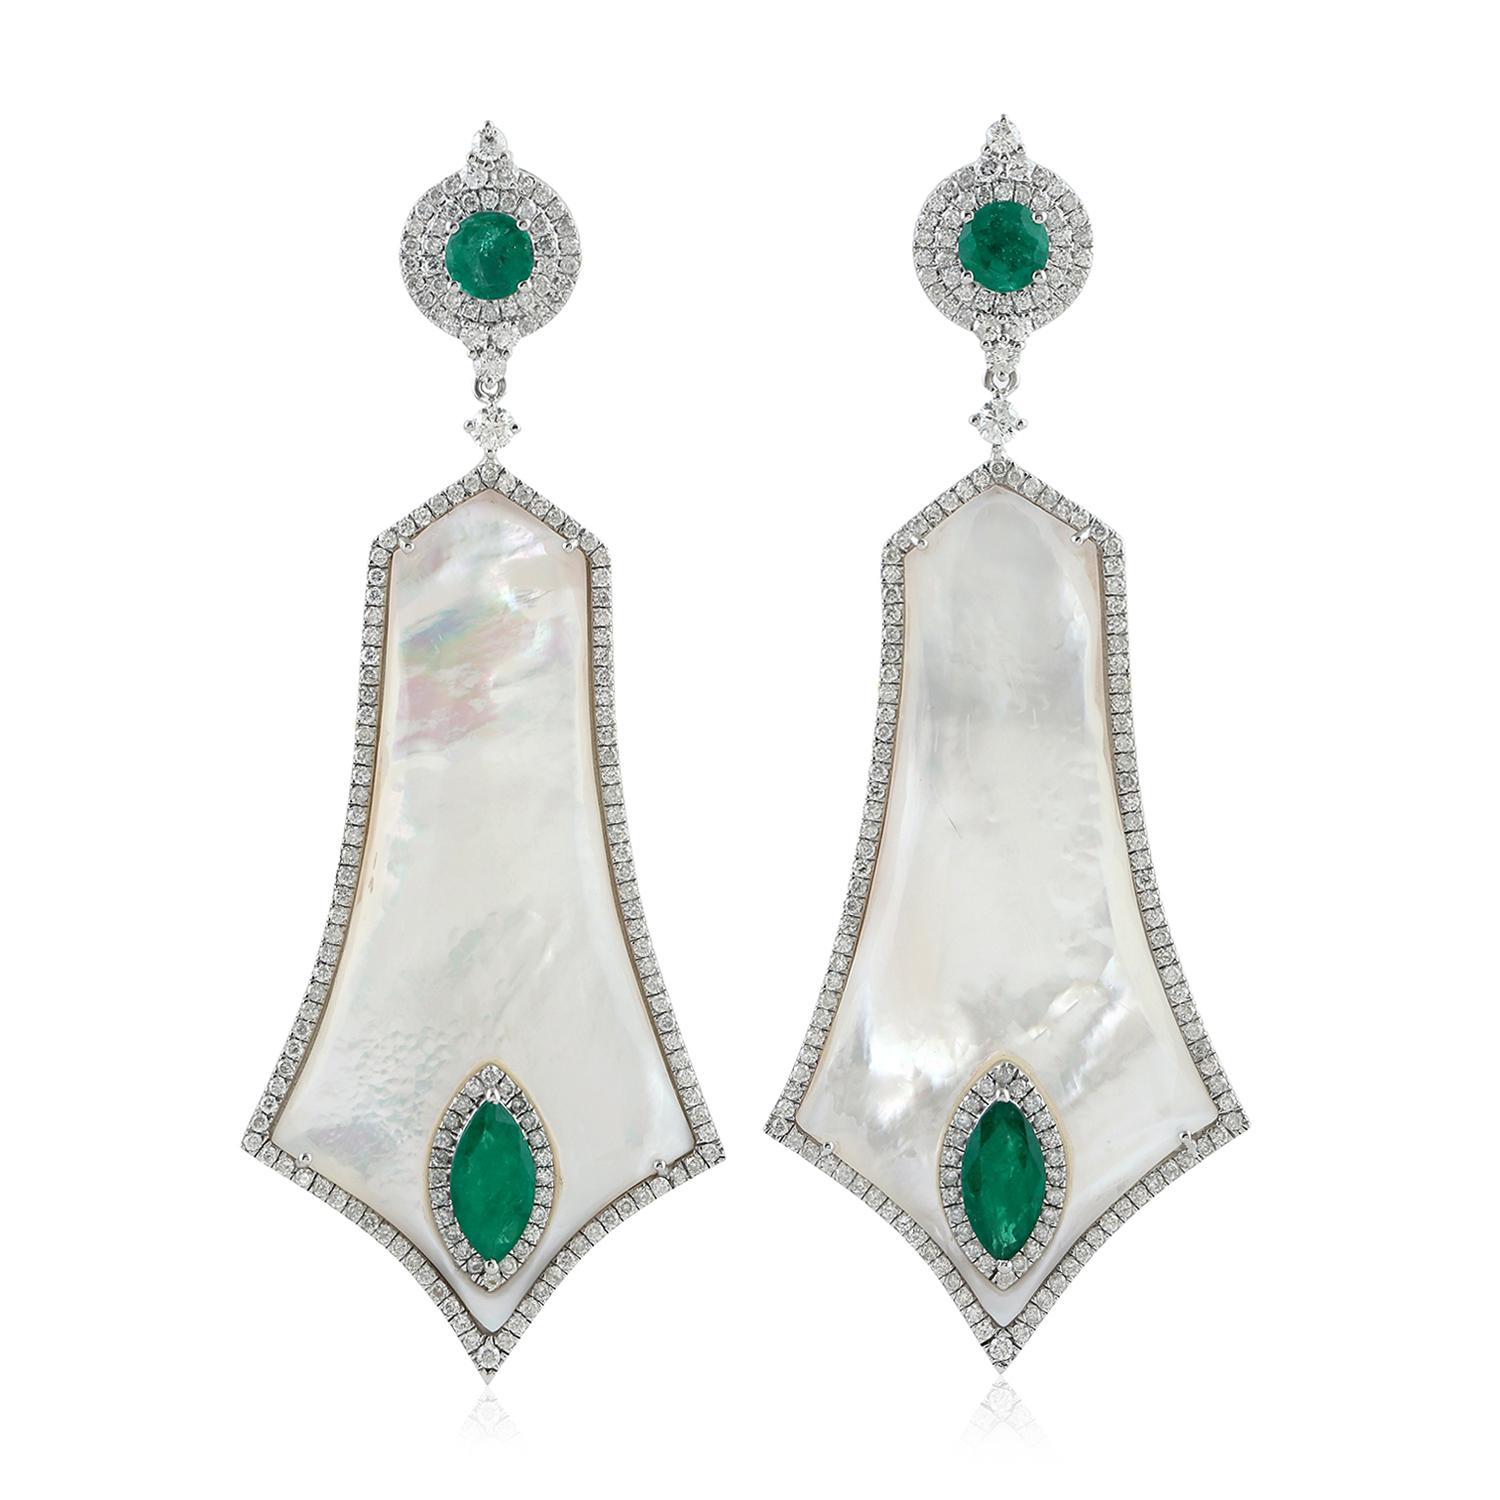 Mixed Cut 34.32 ct Mother-of-Pearl Earring with Diamonds and Emeralds Made In 18k Gold For Sale